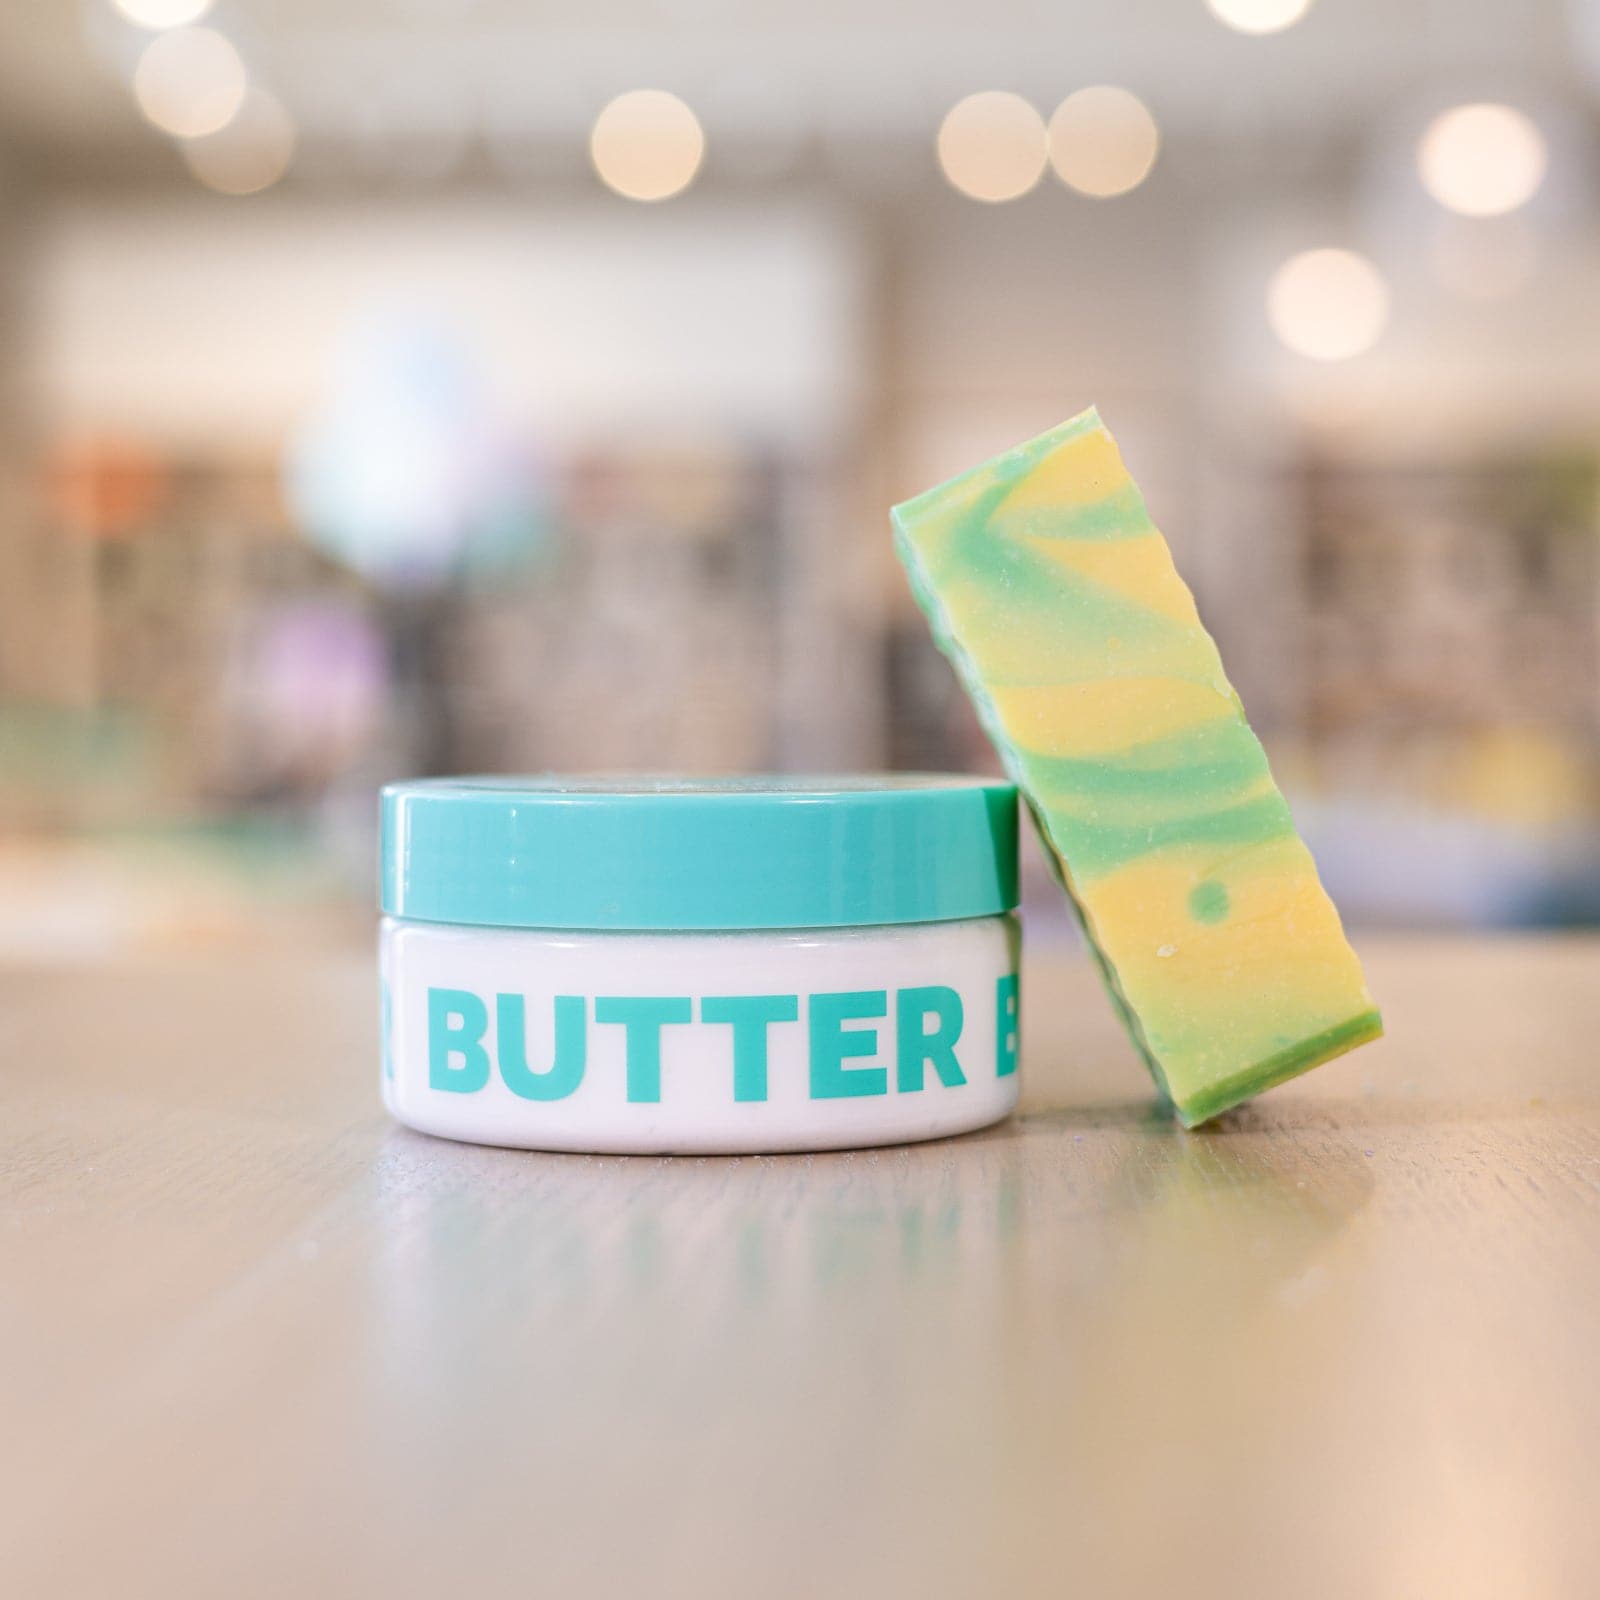 Buff City Soap's lemongrass and eucalyptus scented body butter with a soap bar angled against it